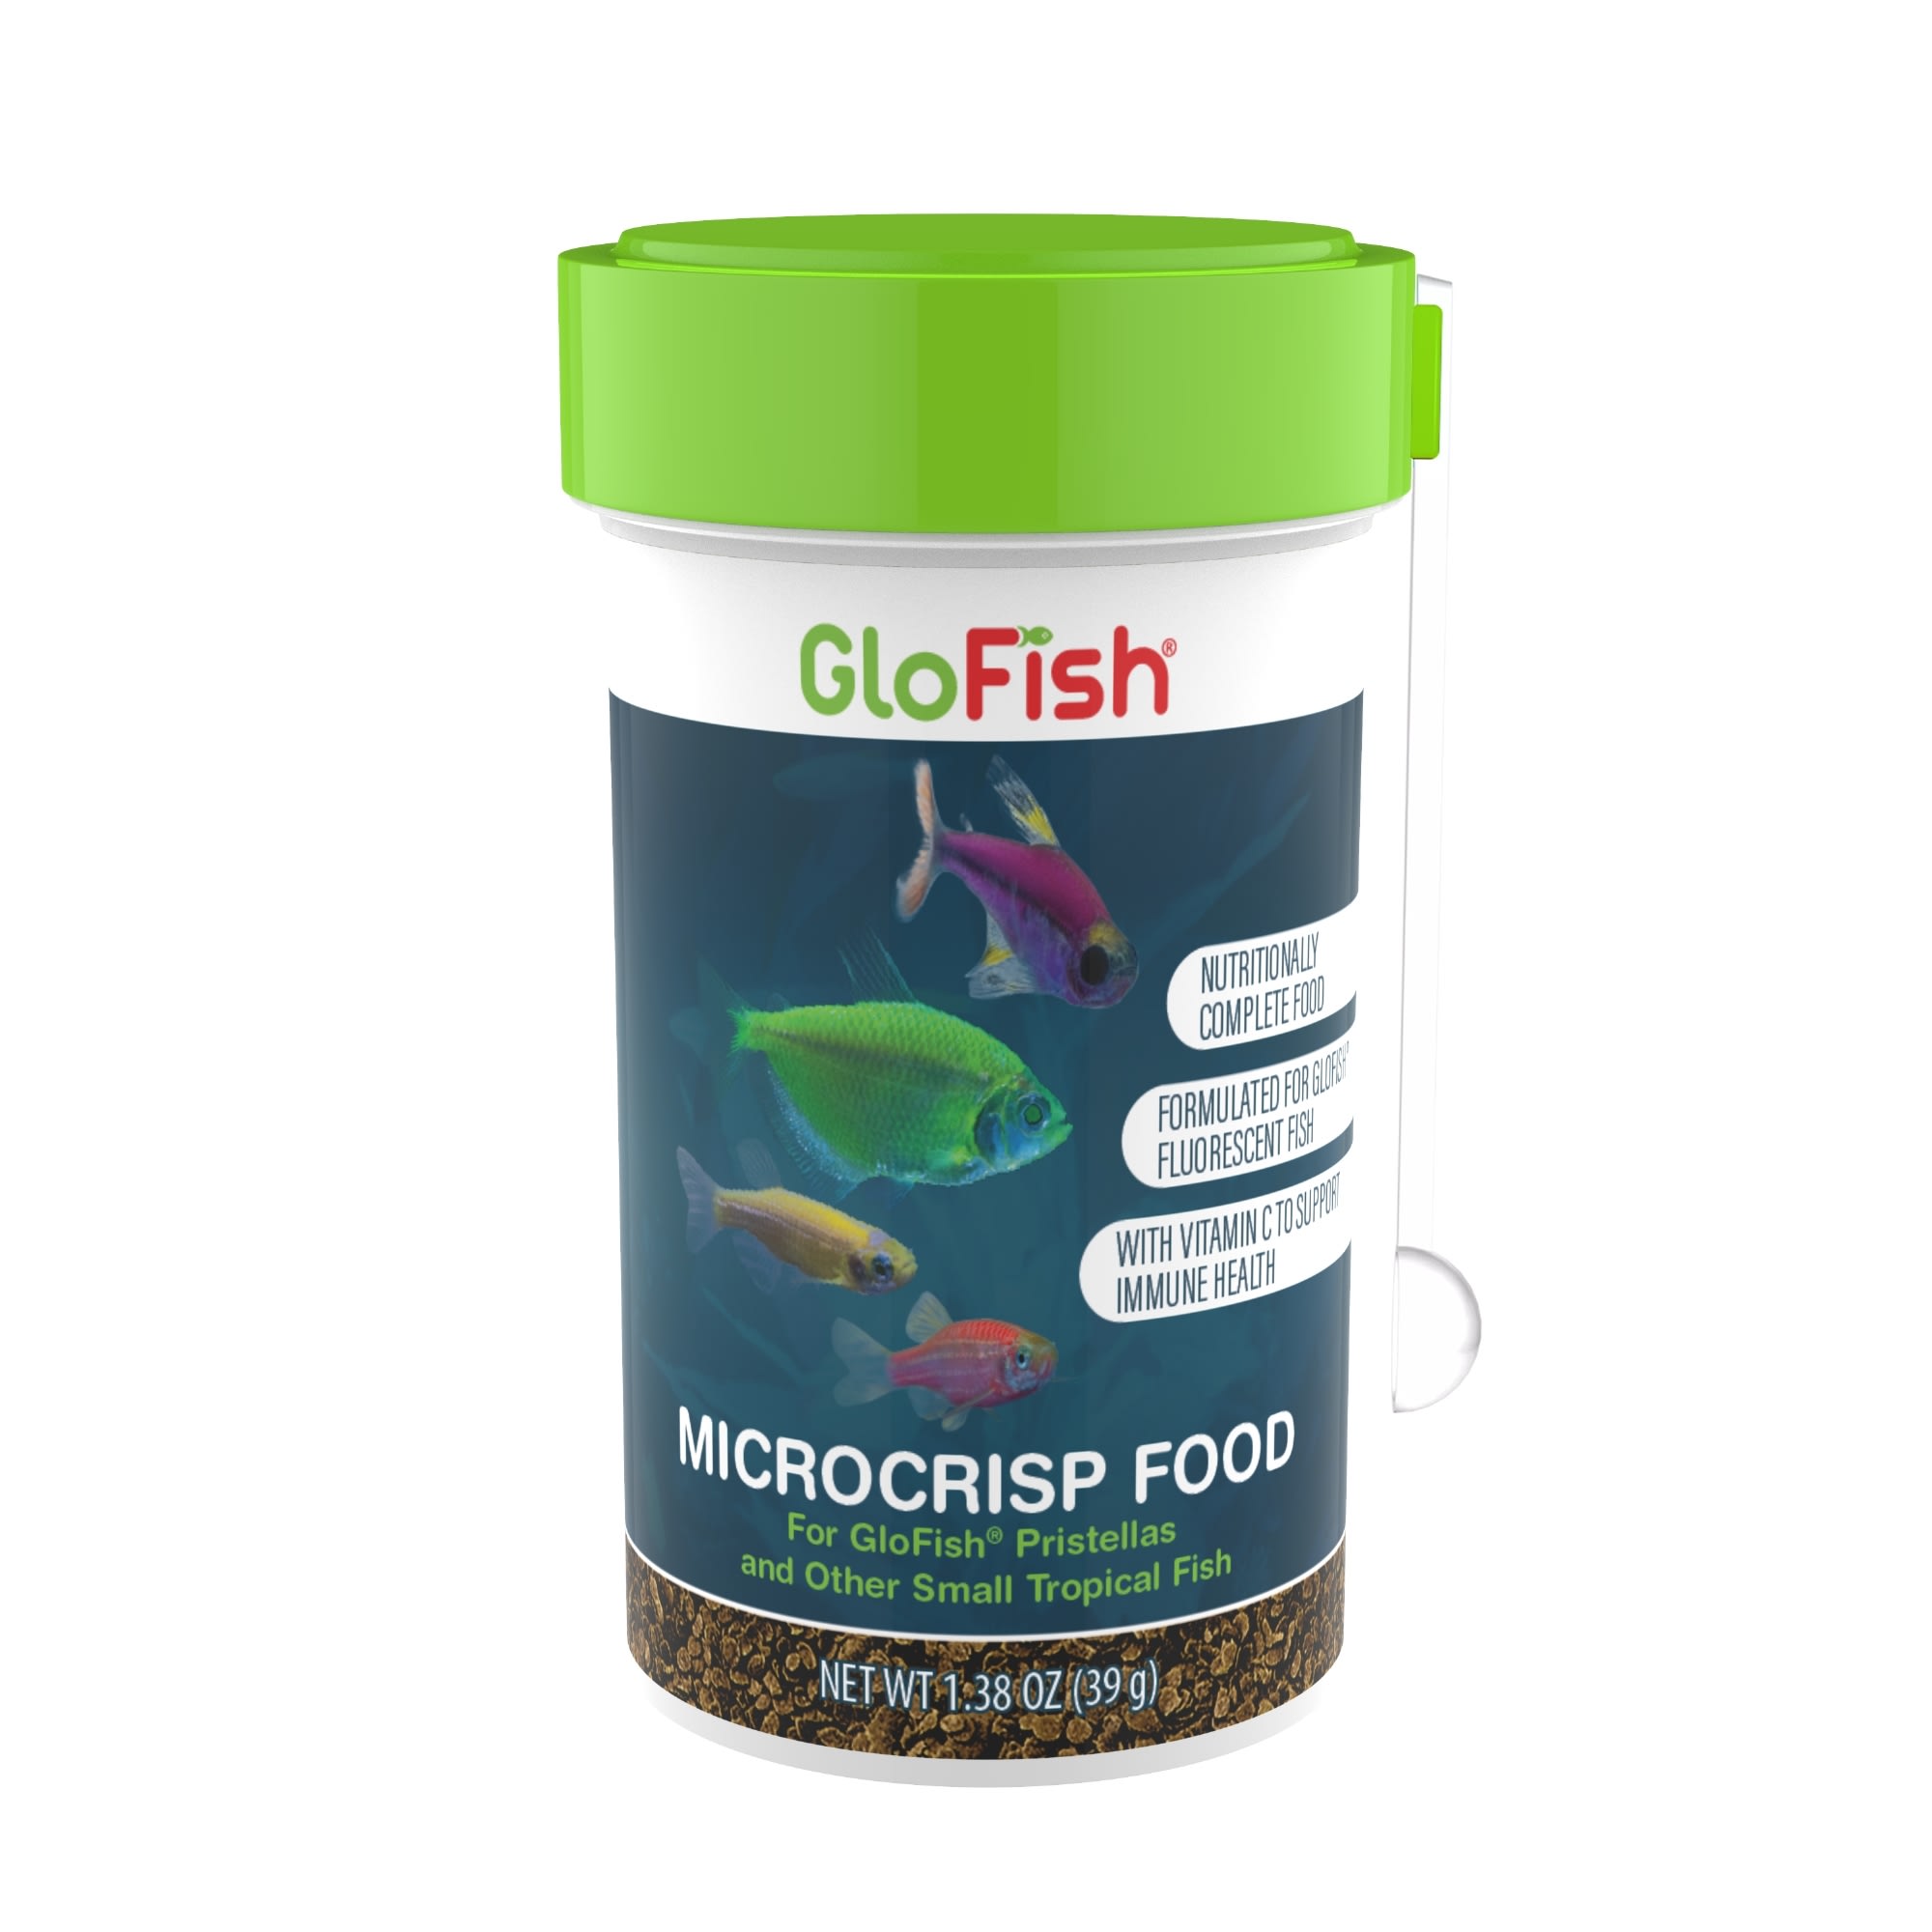 GloFish Microcrisp Nutritionally Complete Food for Small Tropical Fish,  1.38 oz.